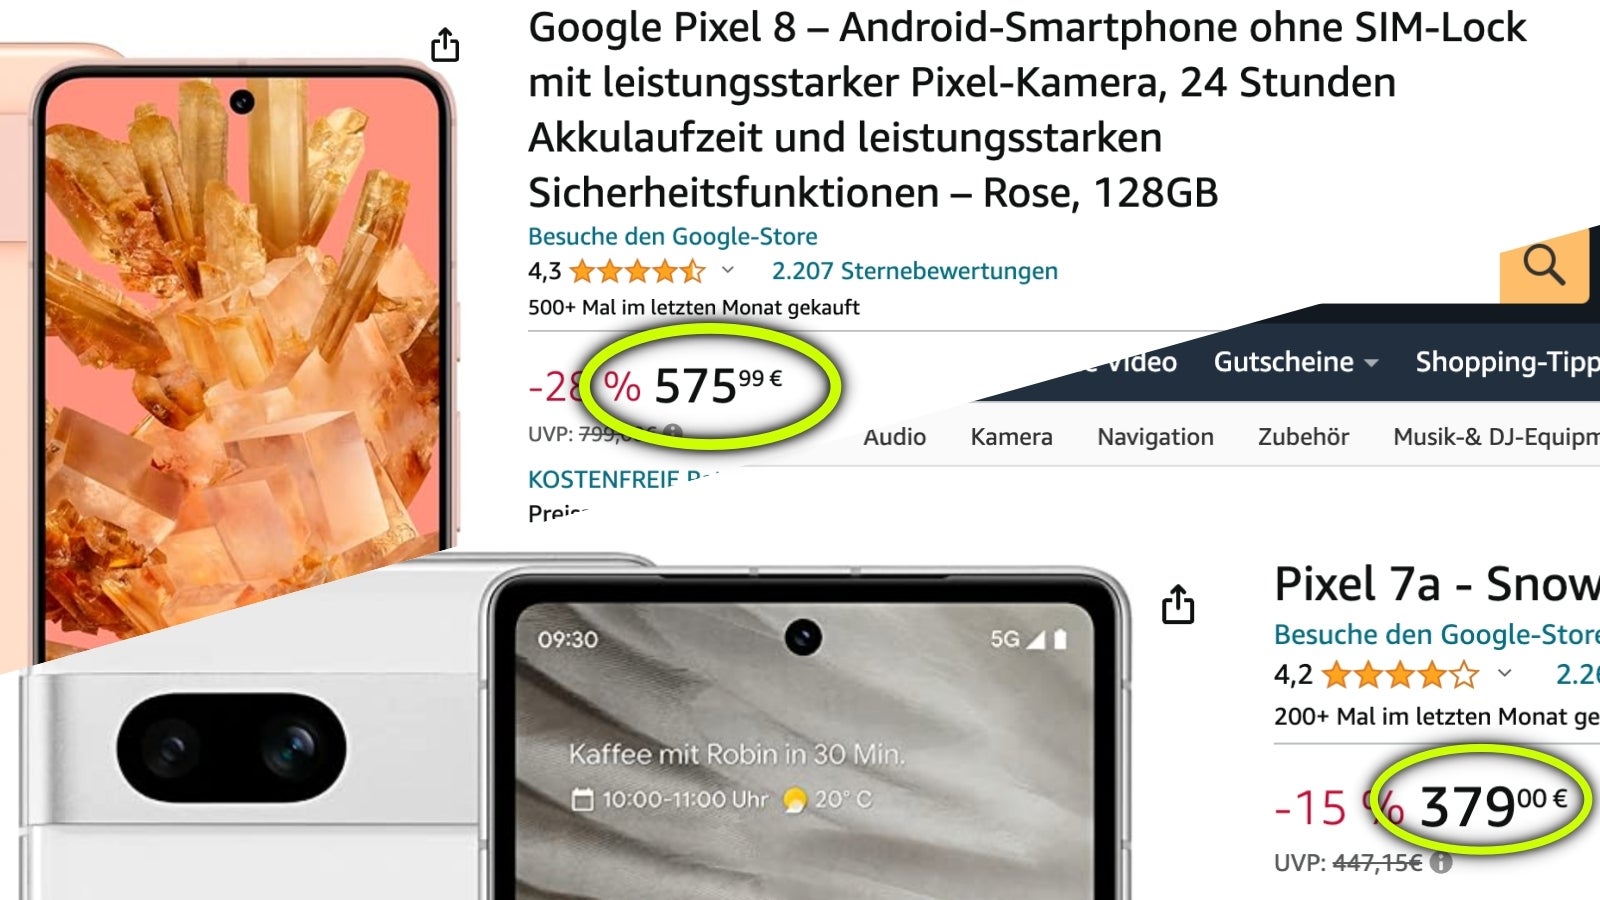 In Europe, the €700 Motorola Edge 50 Pro seems expensive next to the Pixel 8, while the Pixel 7a is nearly half the price (on sale). - Motorola’s super-phone costs €350 in India and €700 in the EU: Simple economics, or taxing the rich?